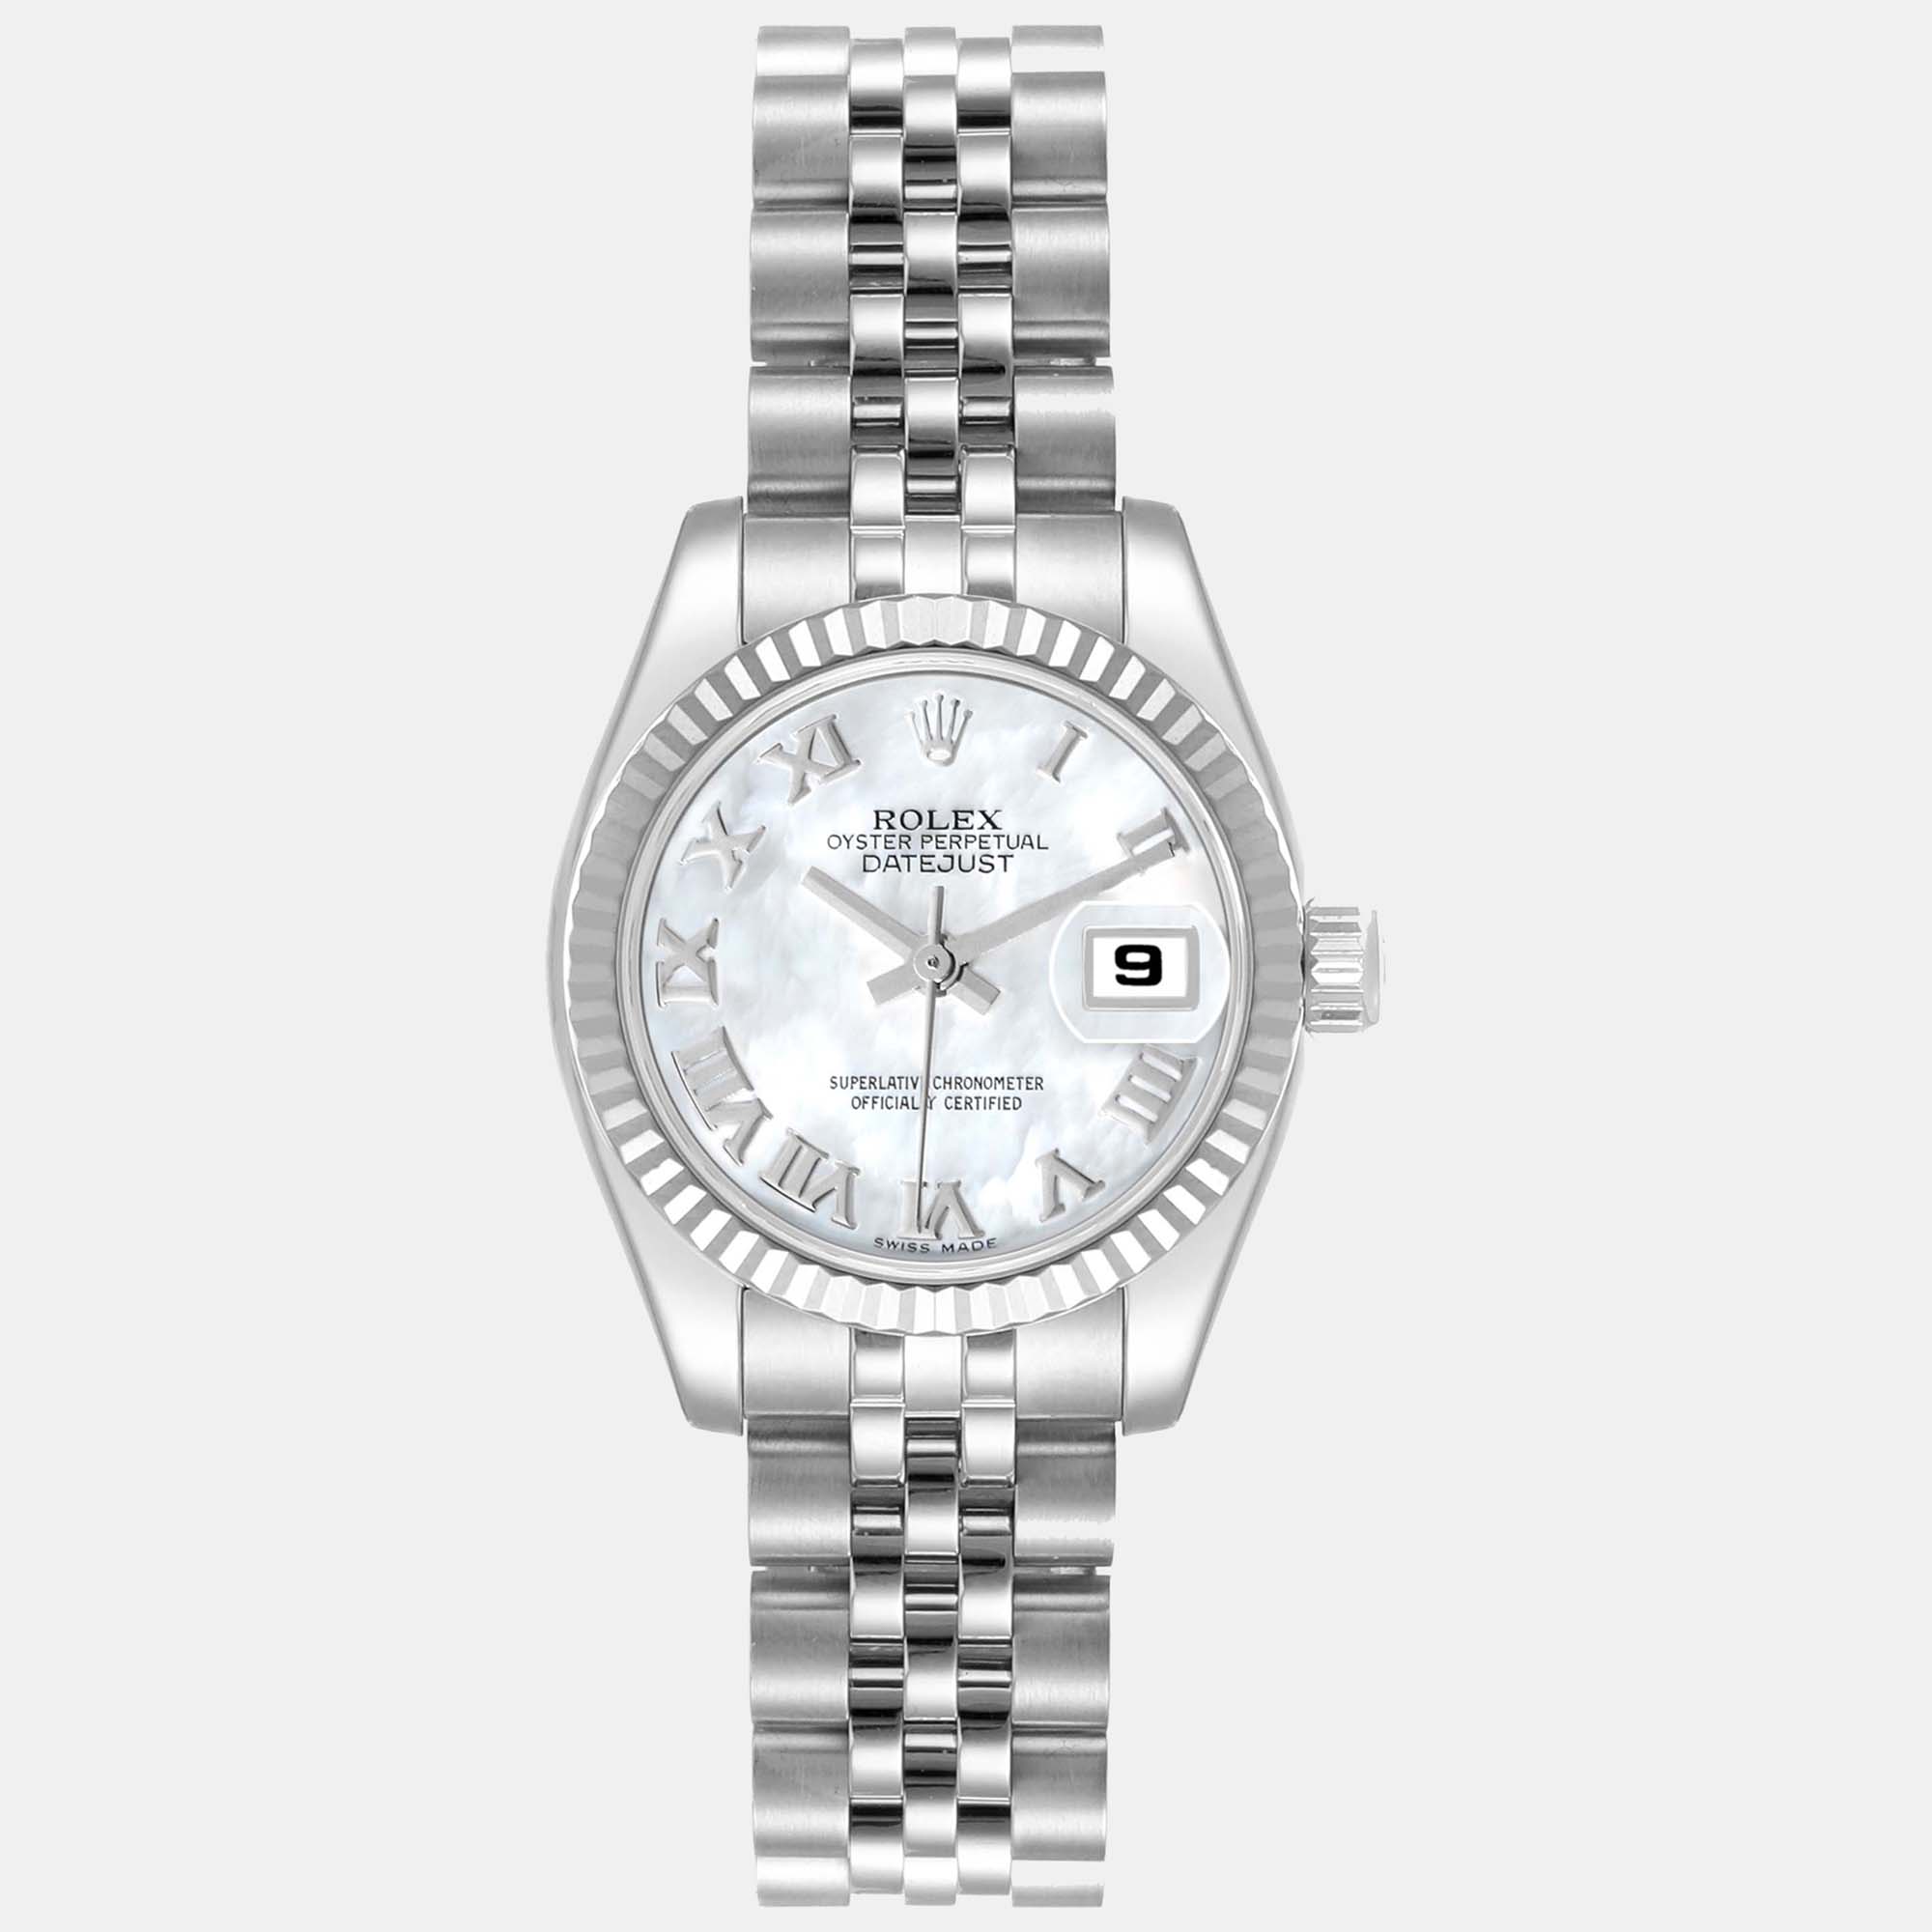 Rolex datejust steel white gold mother of pearl dial ladies watch 179174 26 mm